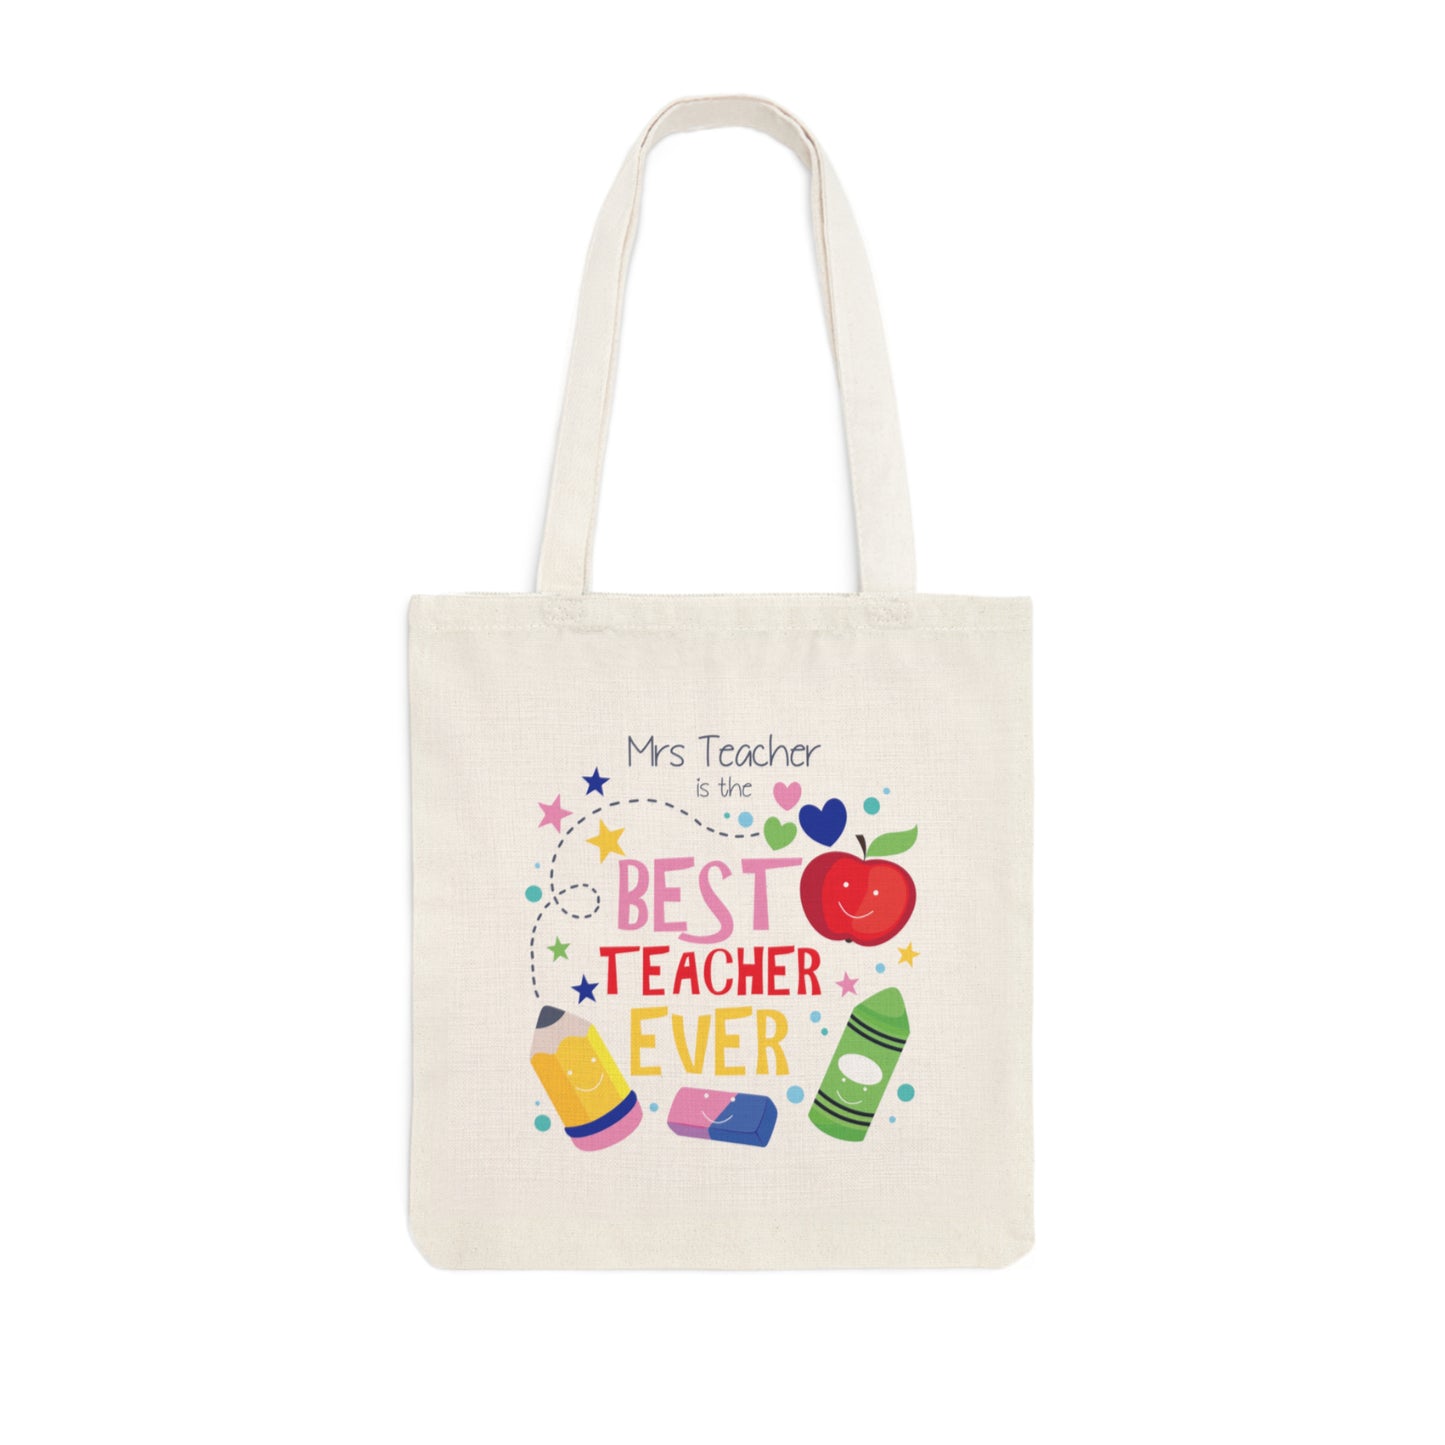 tote bag teachers gift personalised with the teachers name and below reads 'is the best teacher ever' surrounded by cute stationery, stars, hearts and an apple illustration